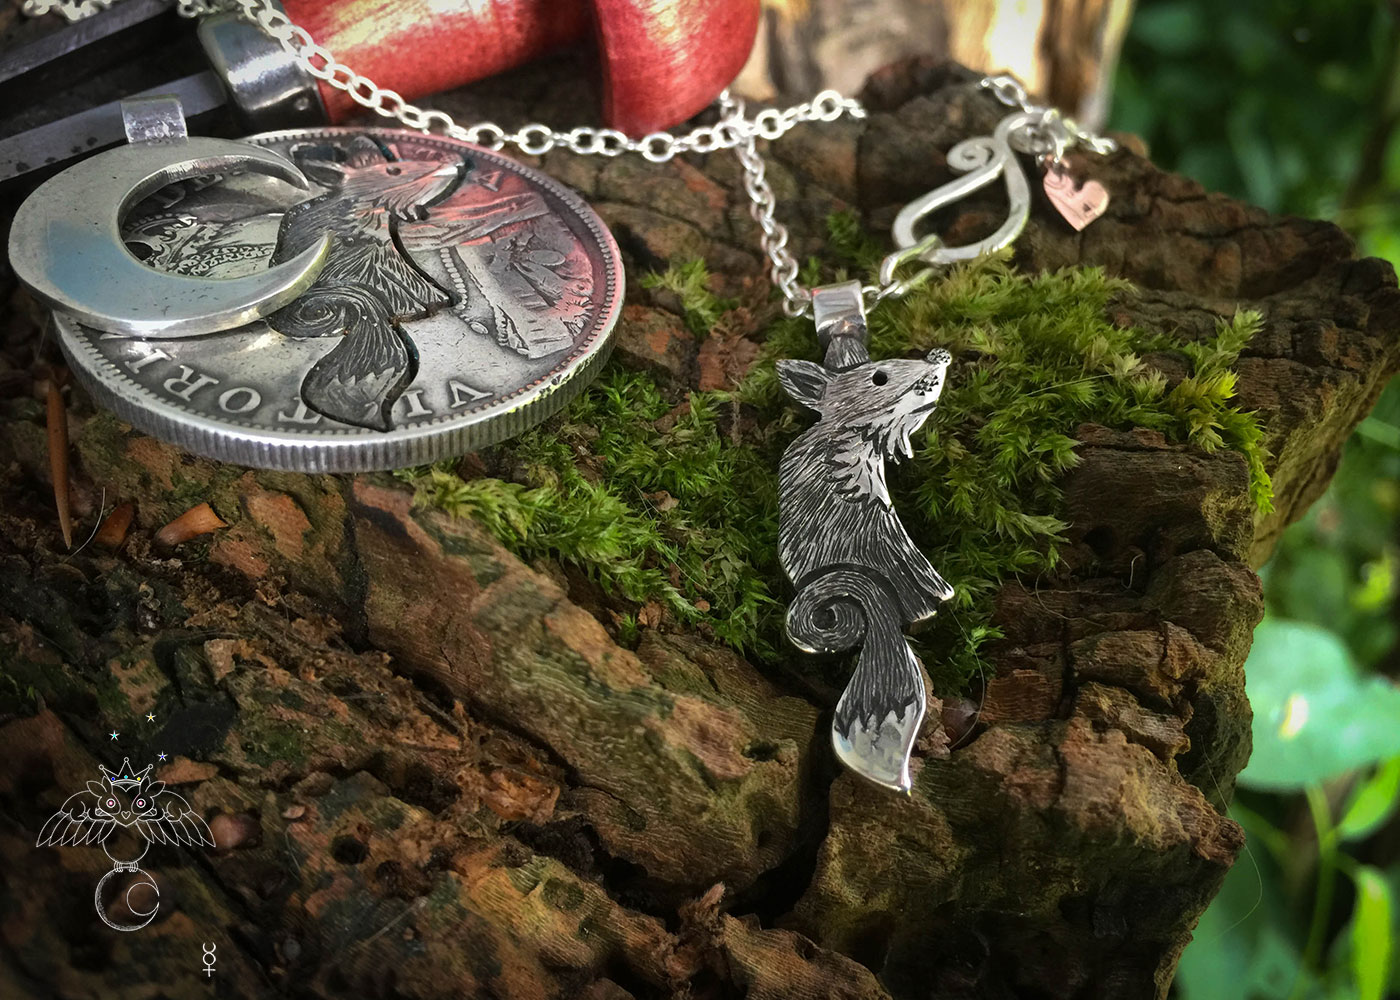 Fox jewellery - handmade using traditional tools and techniques reusing 100 year old sterling silver coins